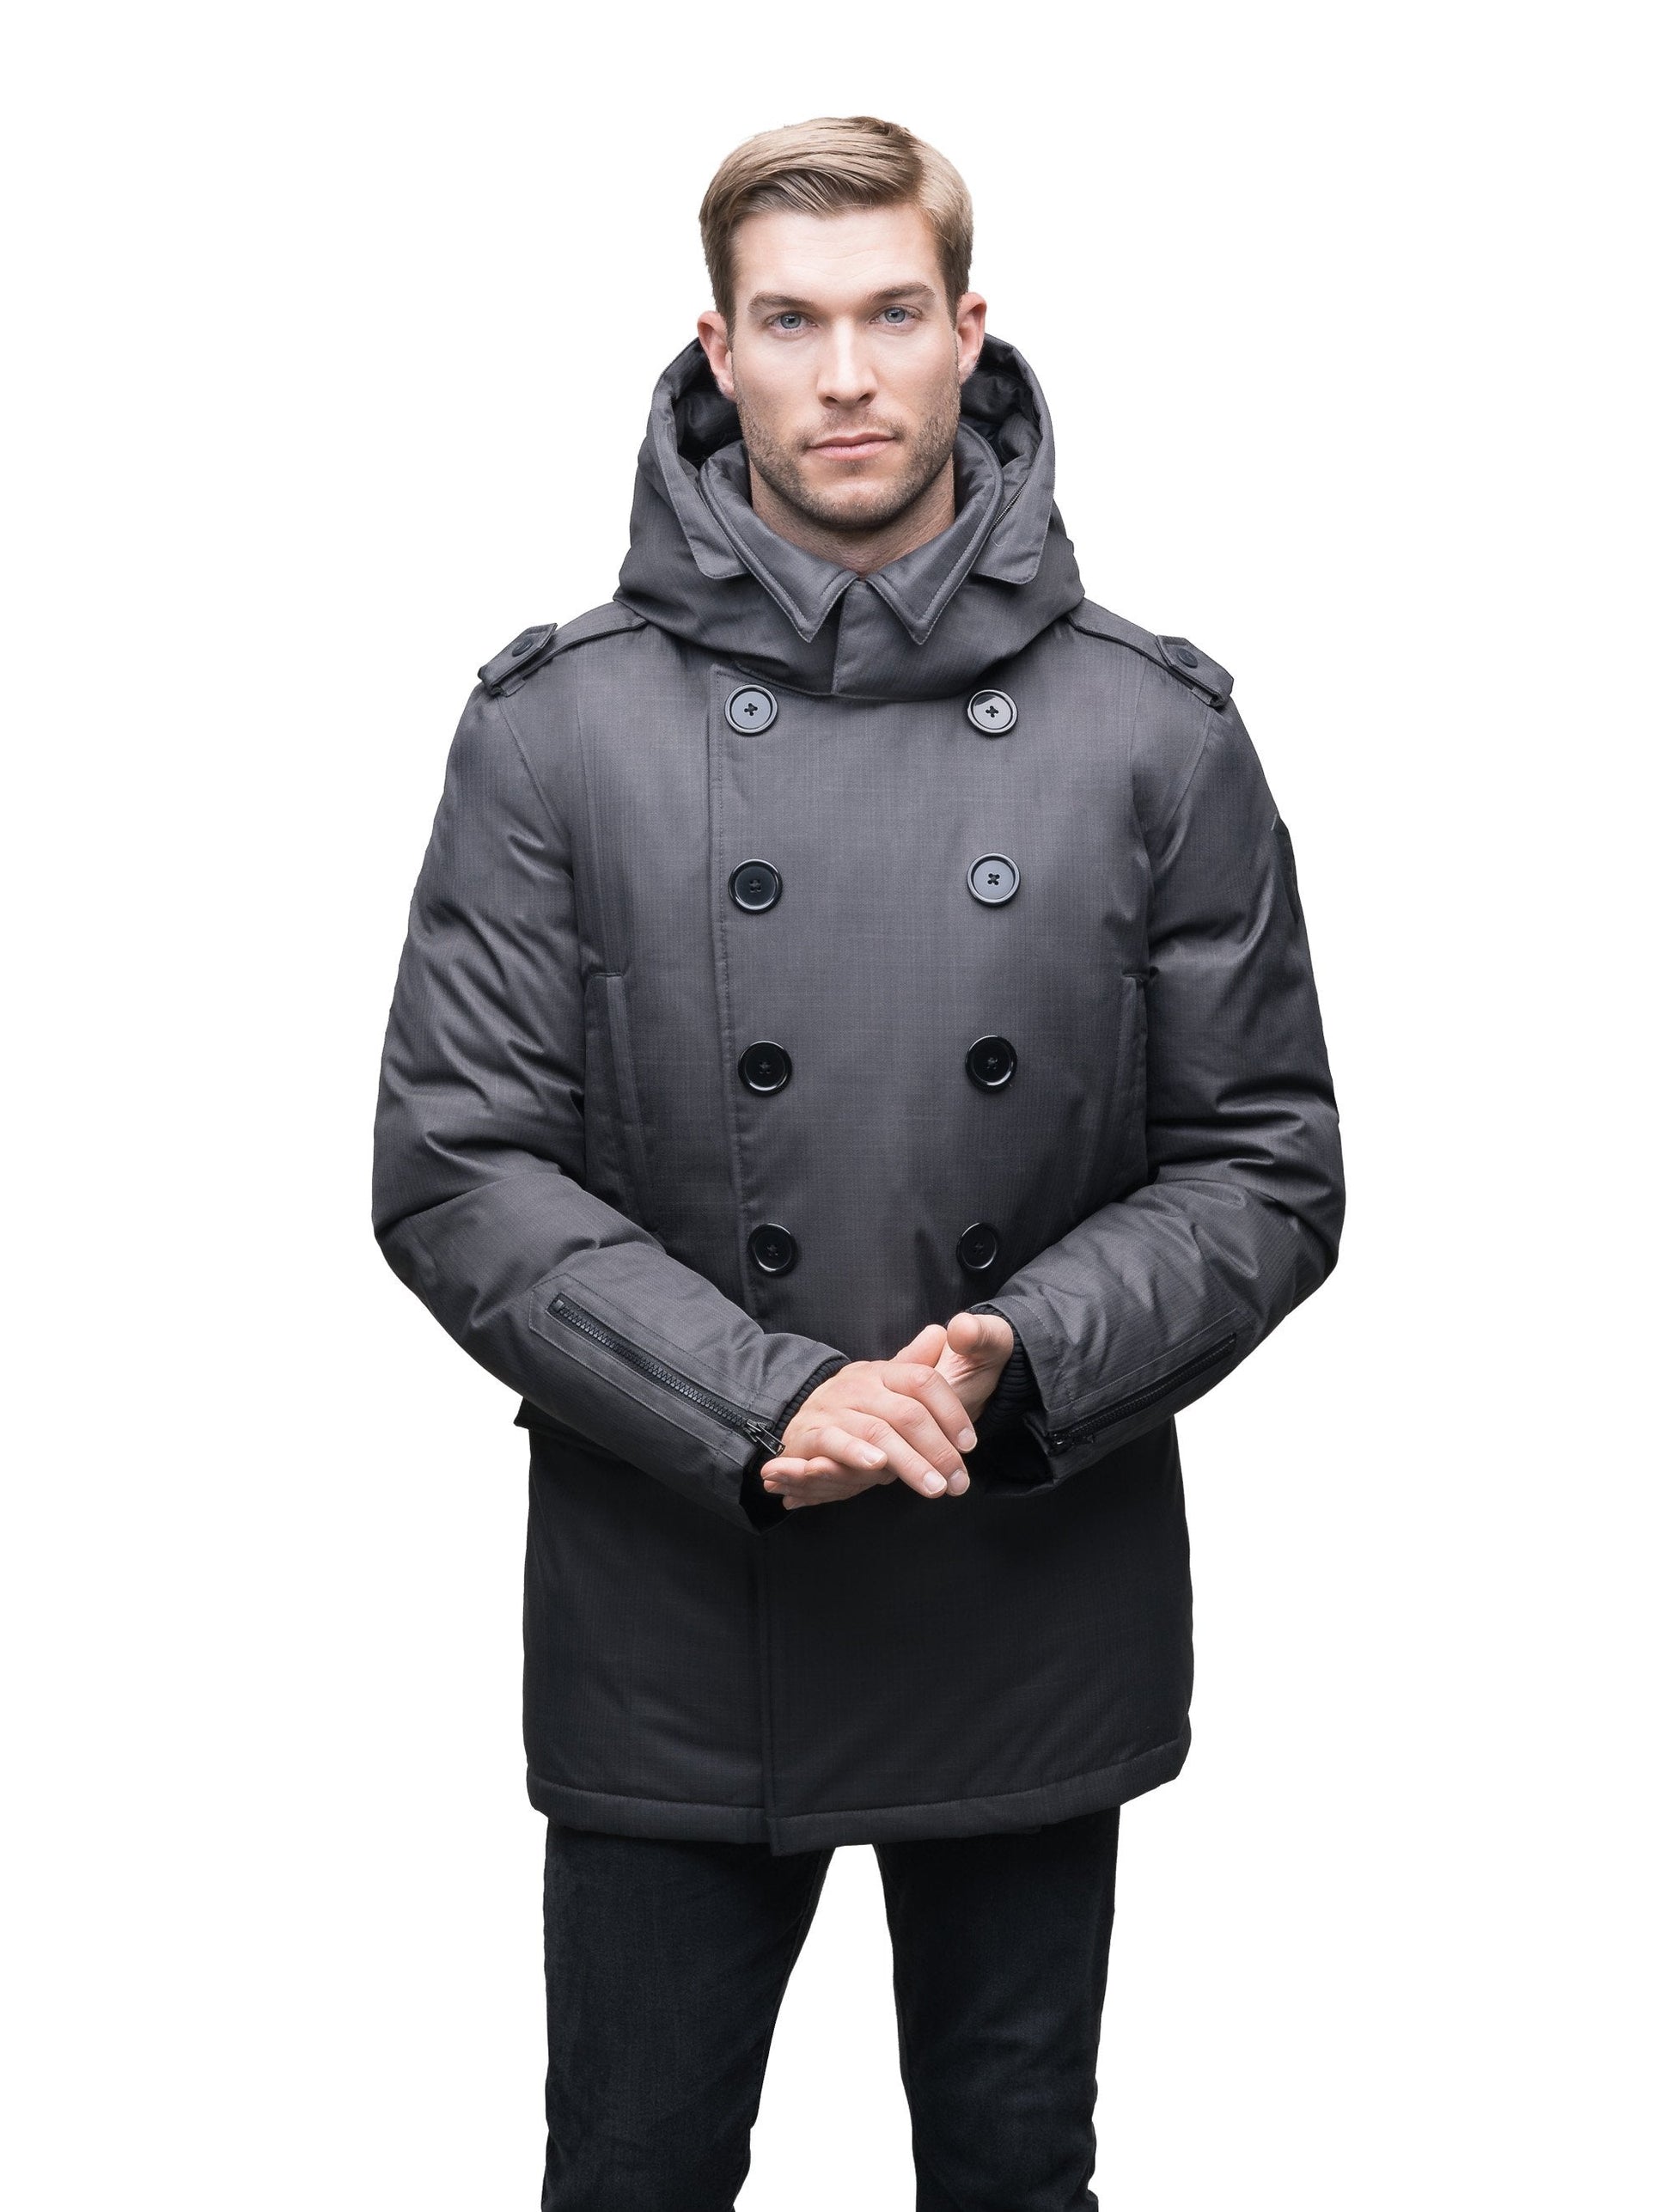 Men's double breasted down filled parka in CH Steel Grey